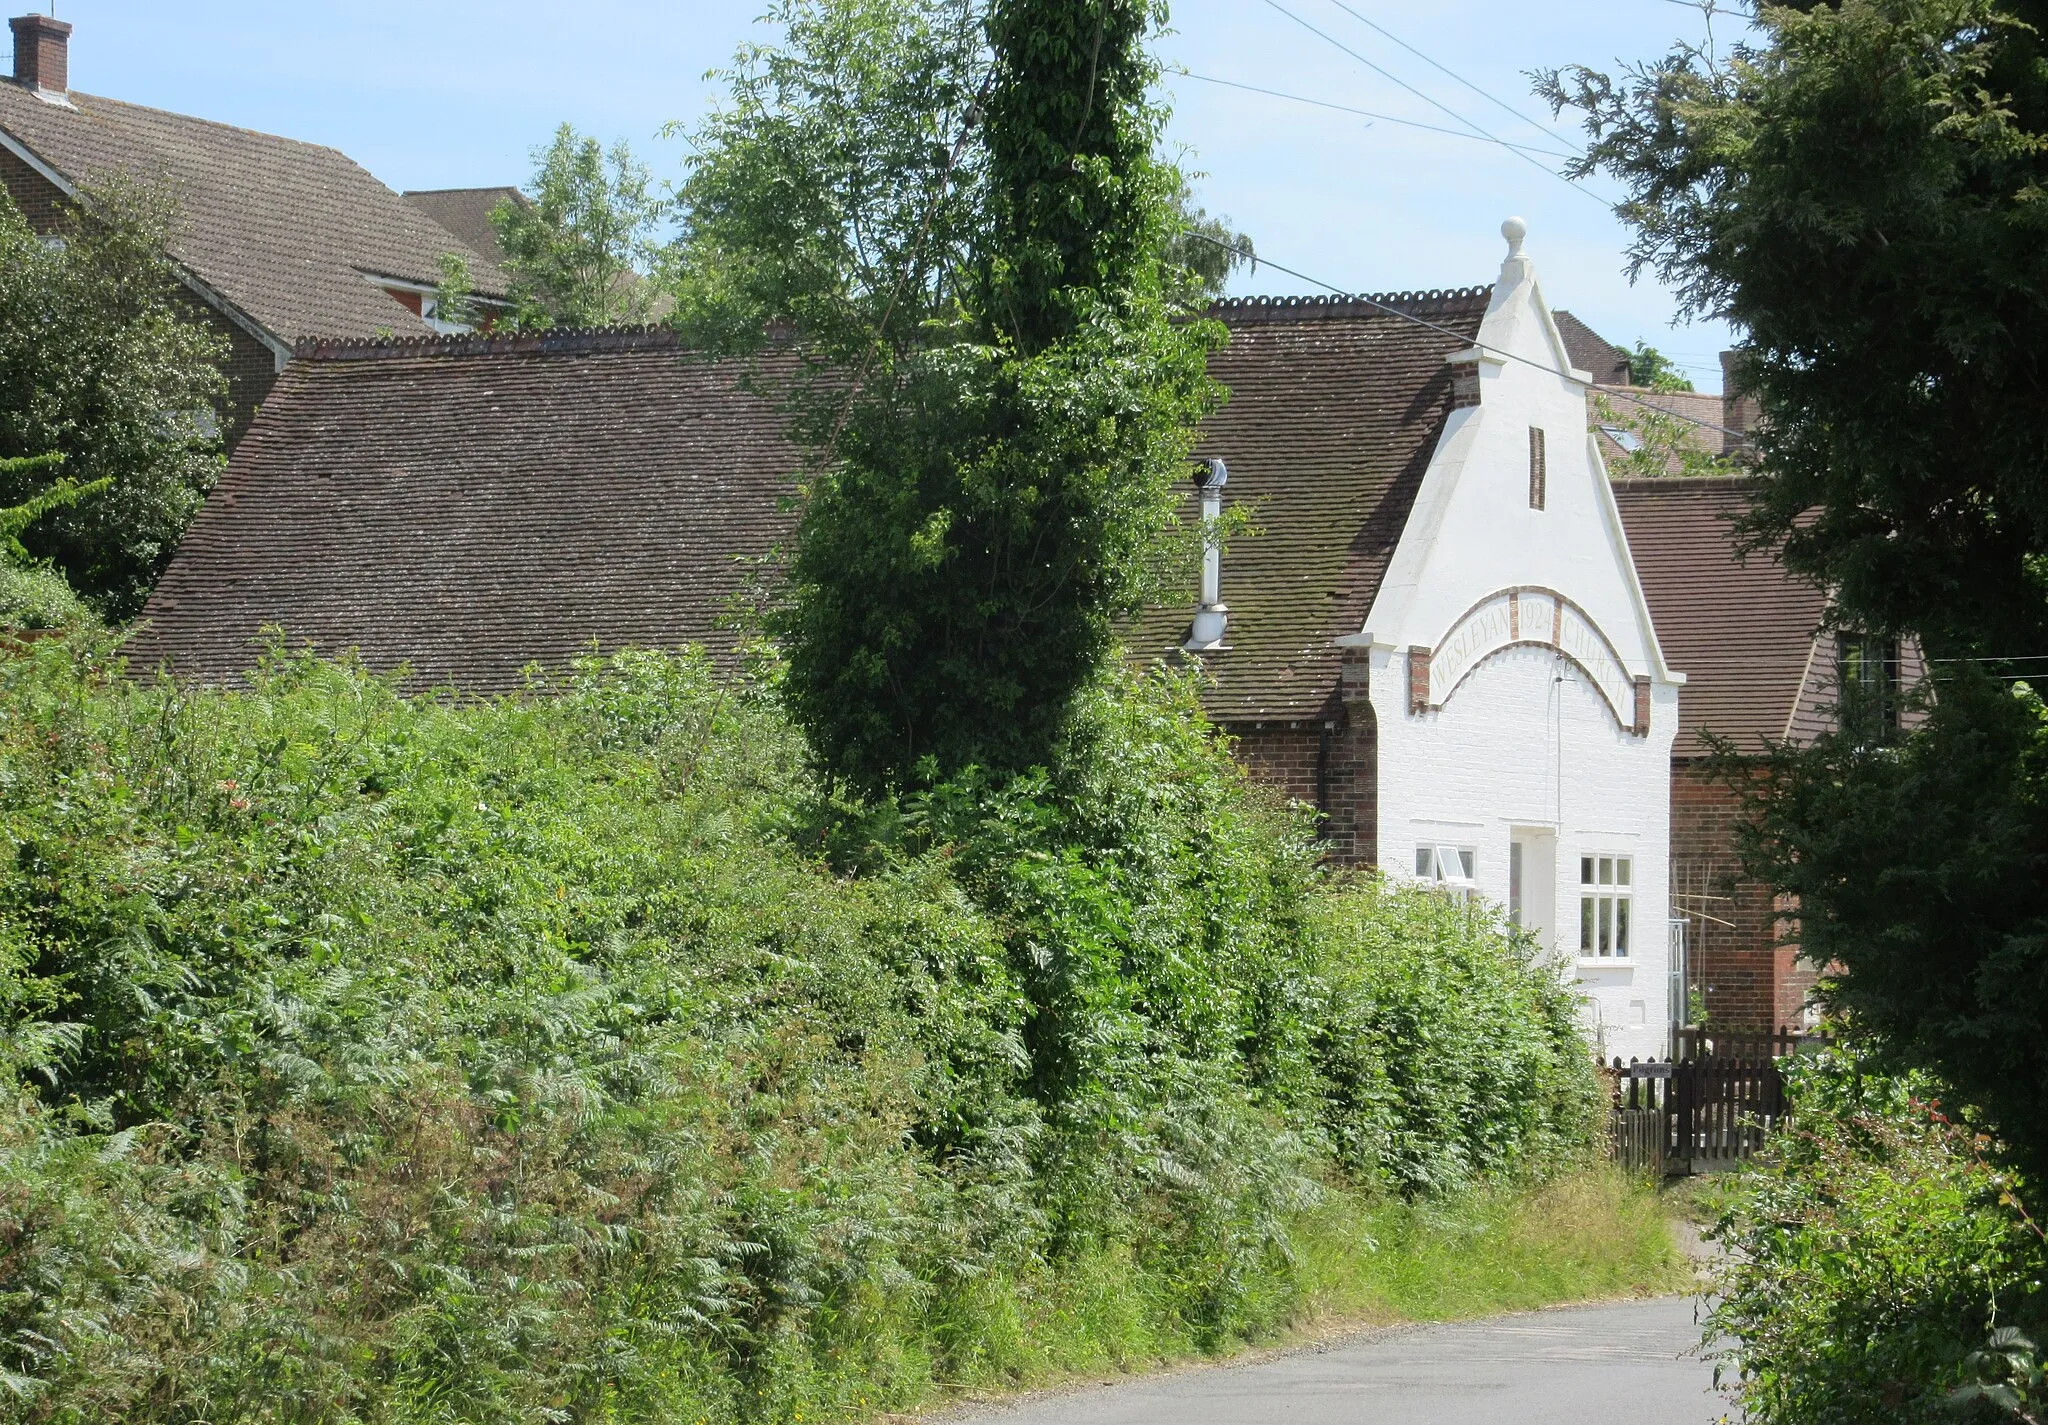 Photo showing: Former Blackboys Methodist Church, Gun Road, Blackboys, near Framfield, Wealden District, East Sussex, England.  Two adjacent buildings make up this former chapel, which was founded in 1883.  The larger building on the left has a 1924 datestone, though.  Both have now been converted into houses after the church ceased to meet in 2006.